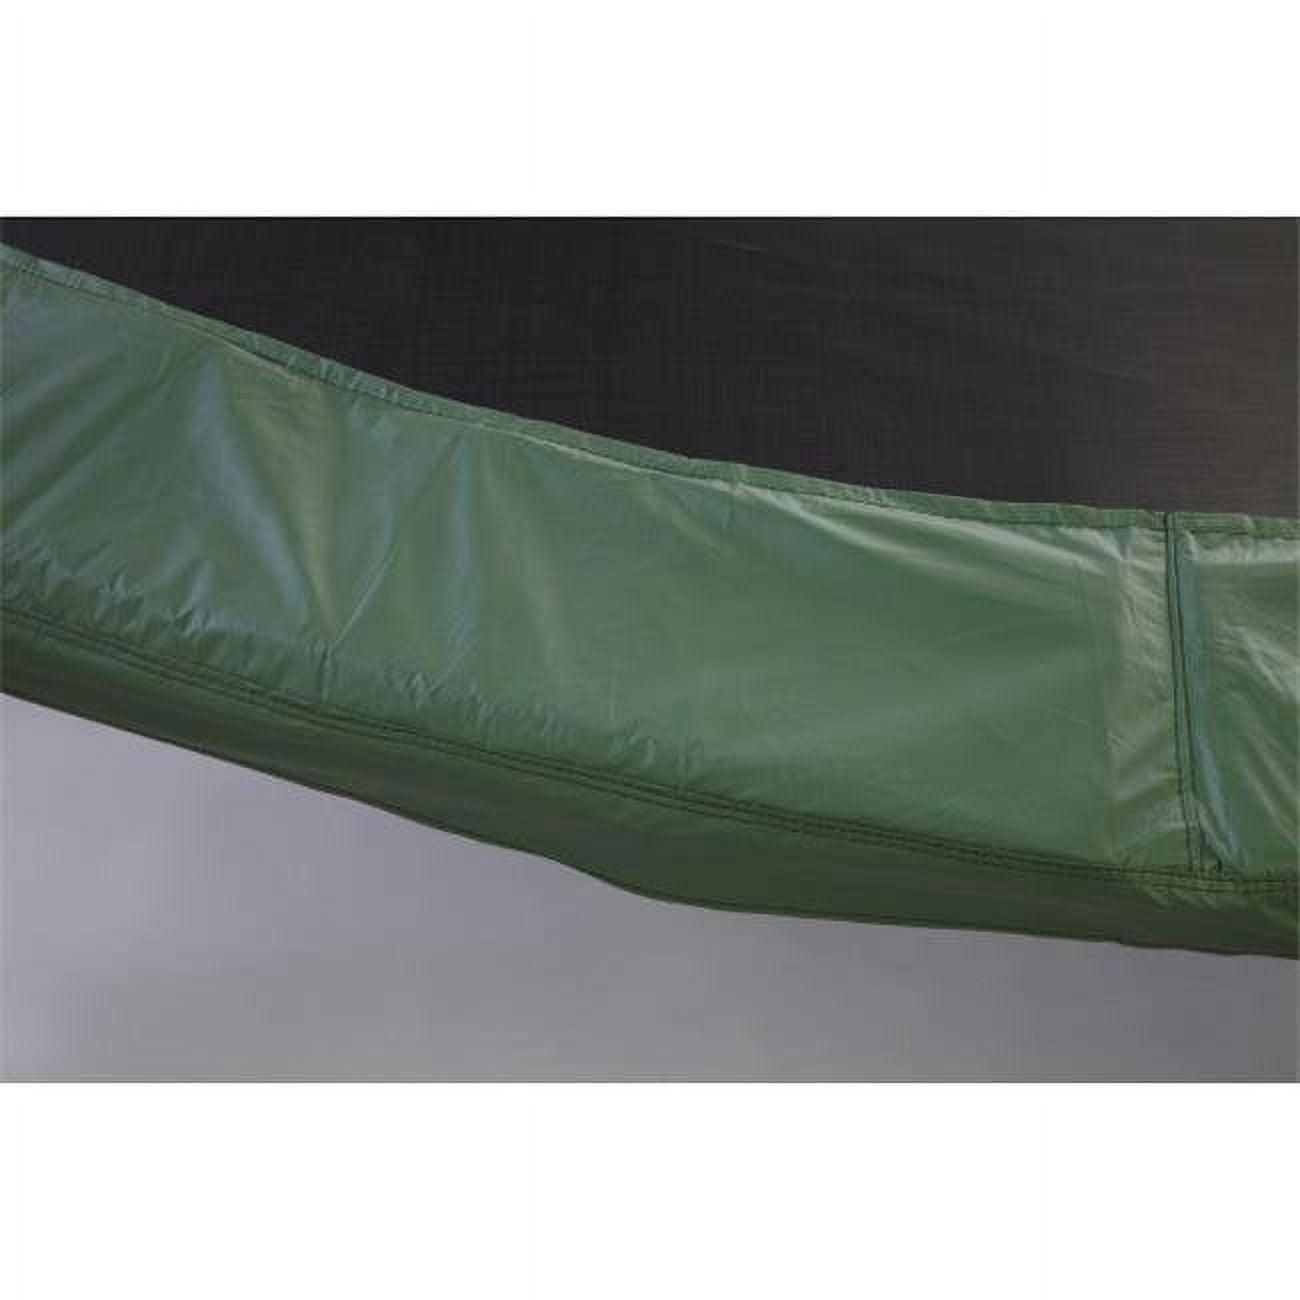 Pad15-10g 15 Ft. X 10 In. Wide Safety Pad Green